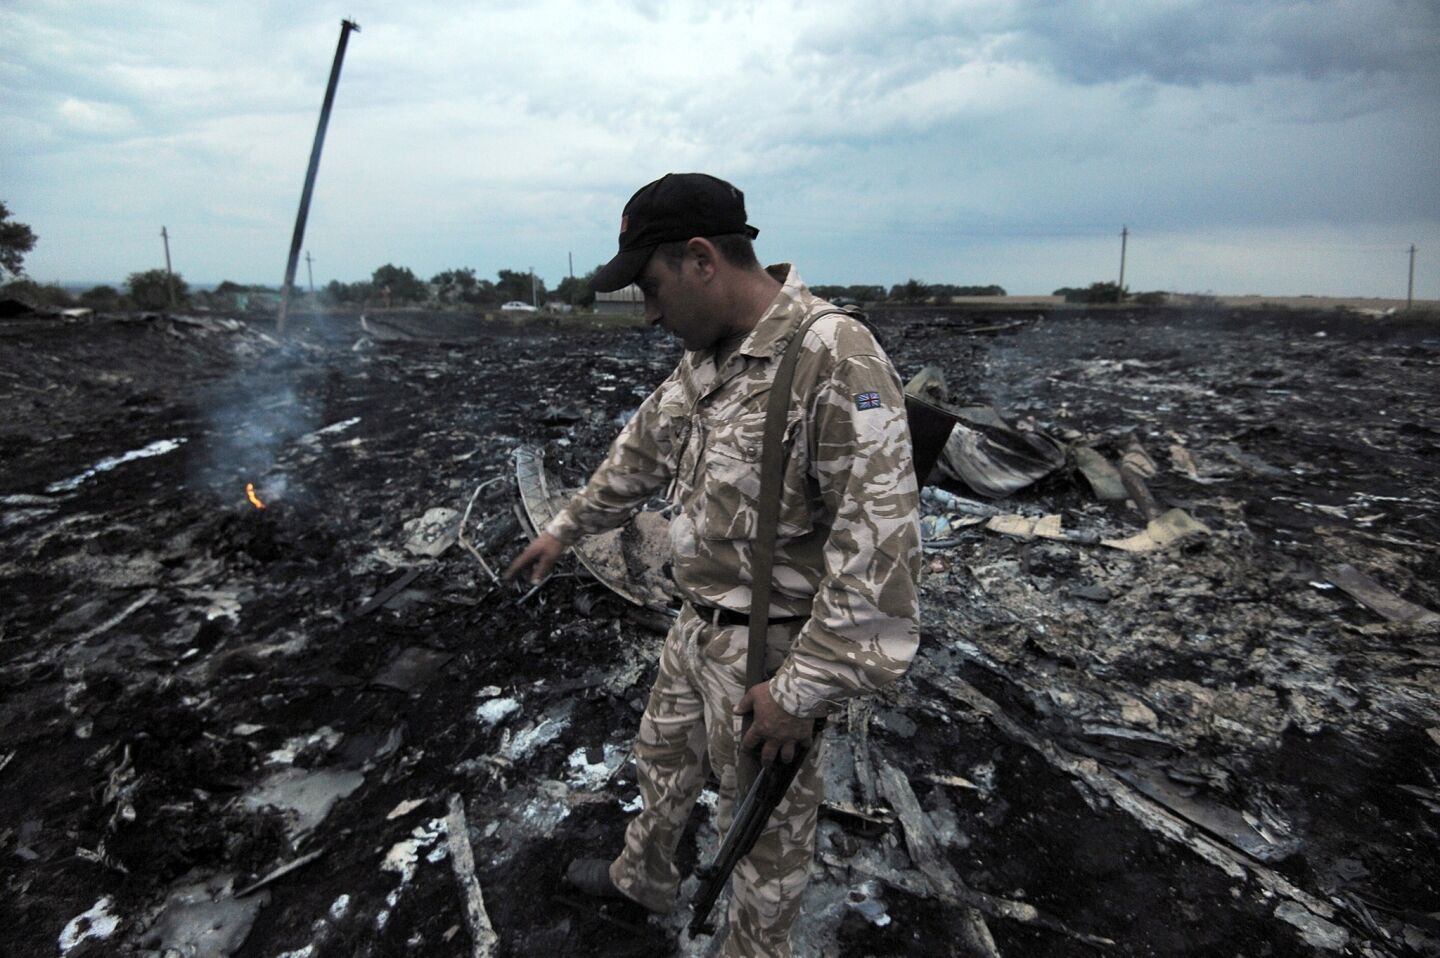 Malaysia Airlines jet crashes in Ukraine